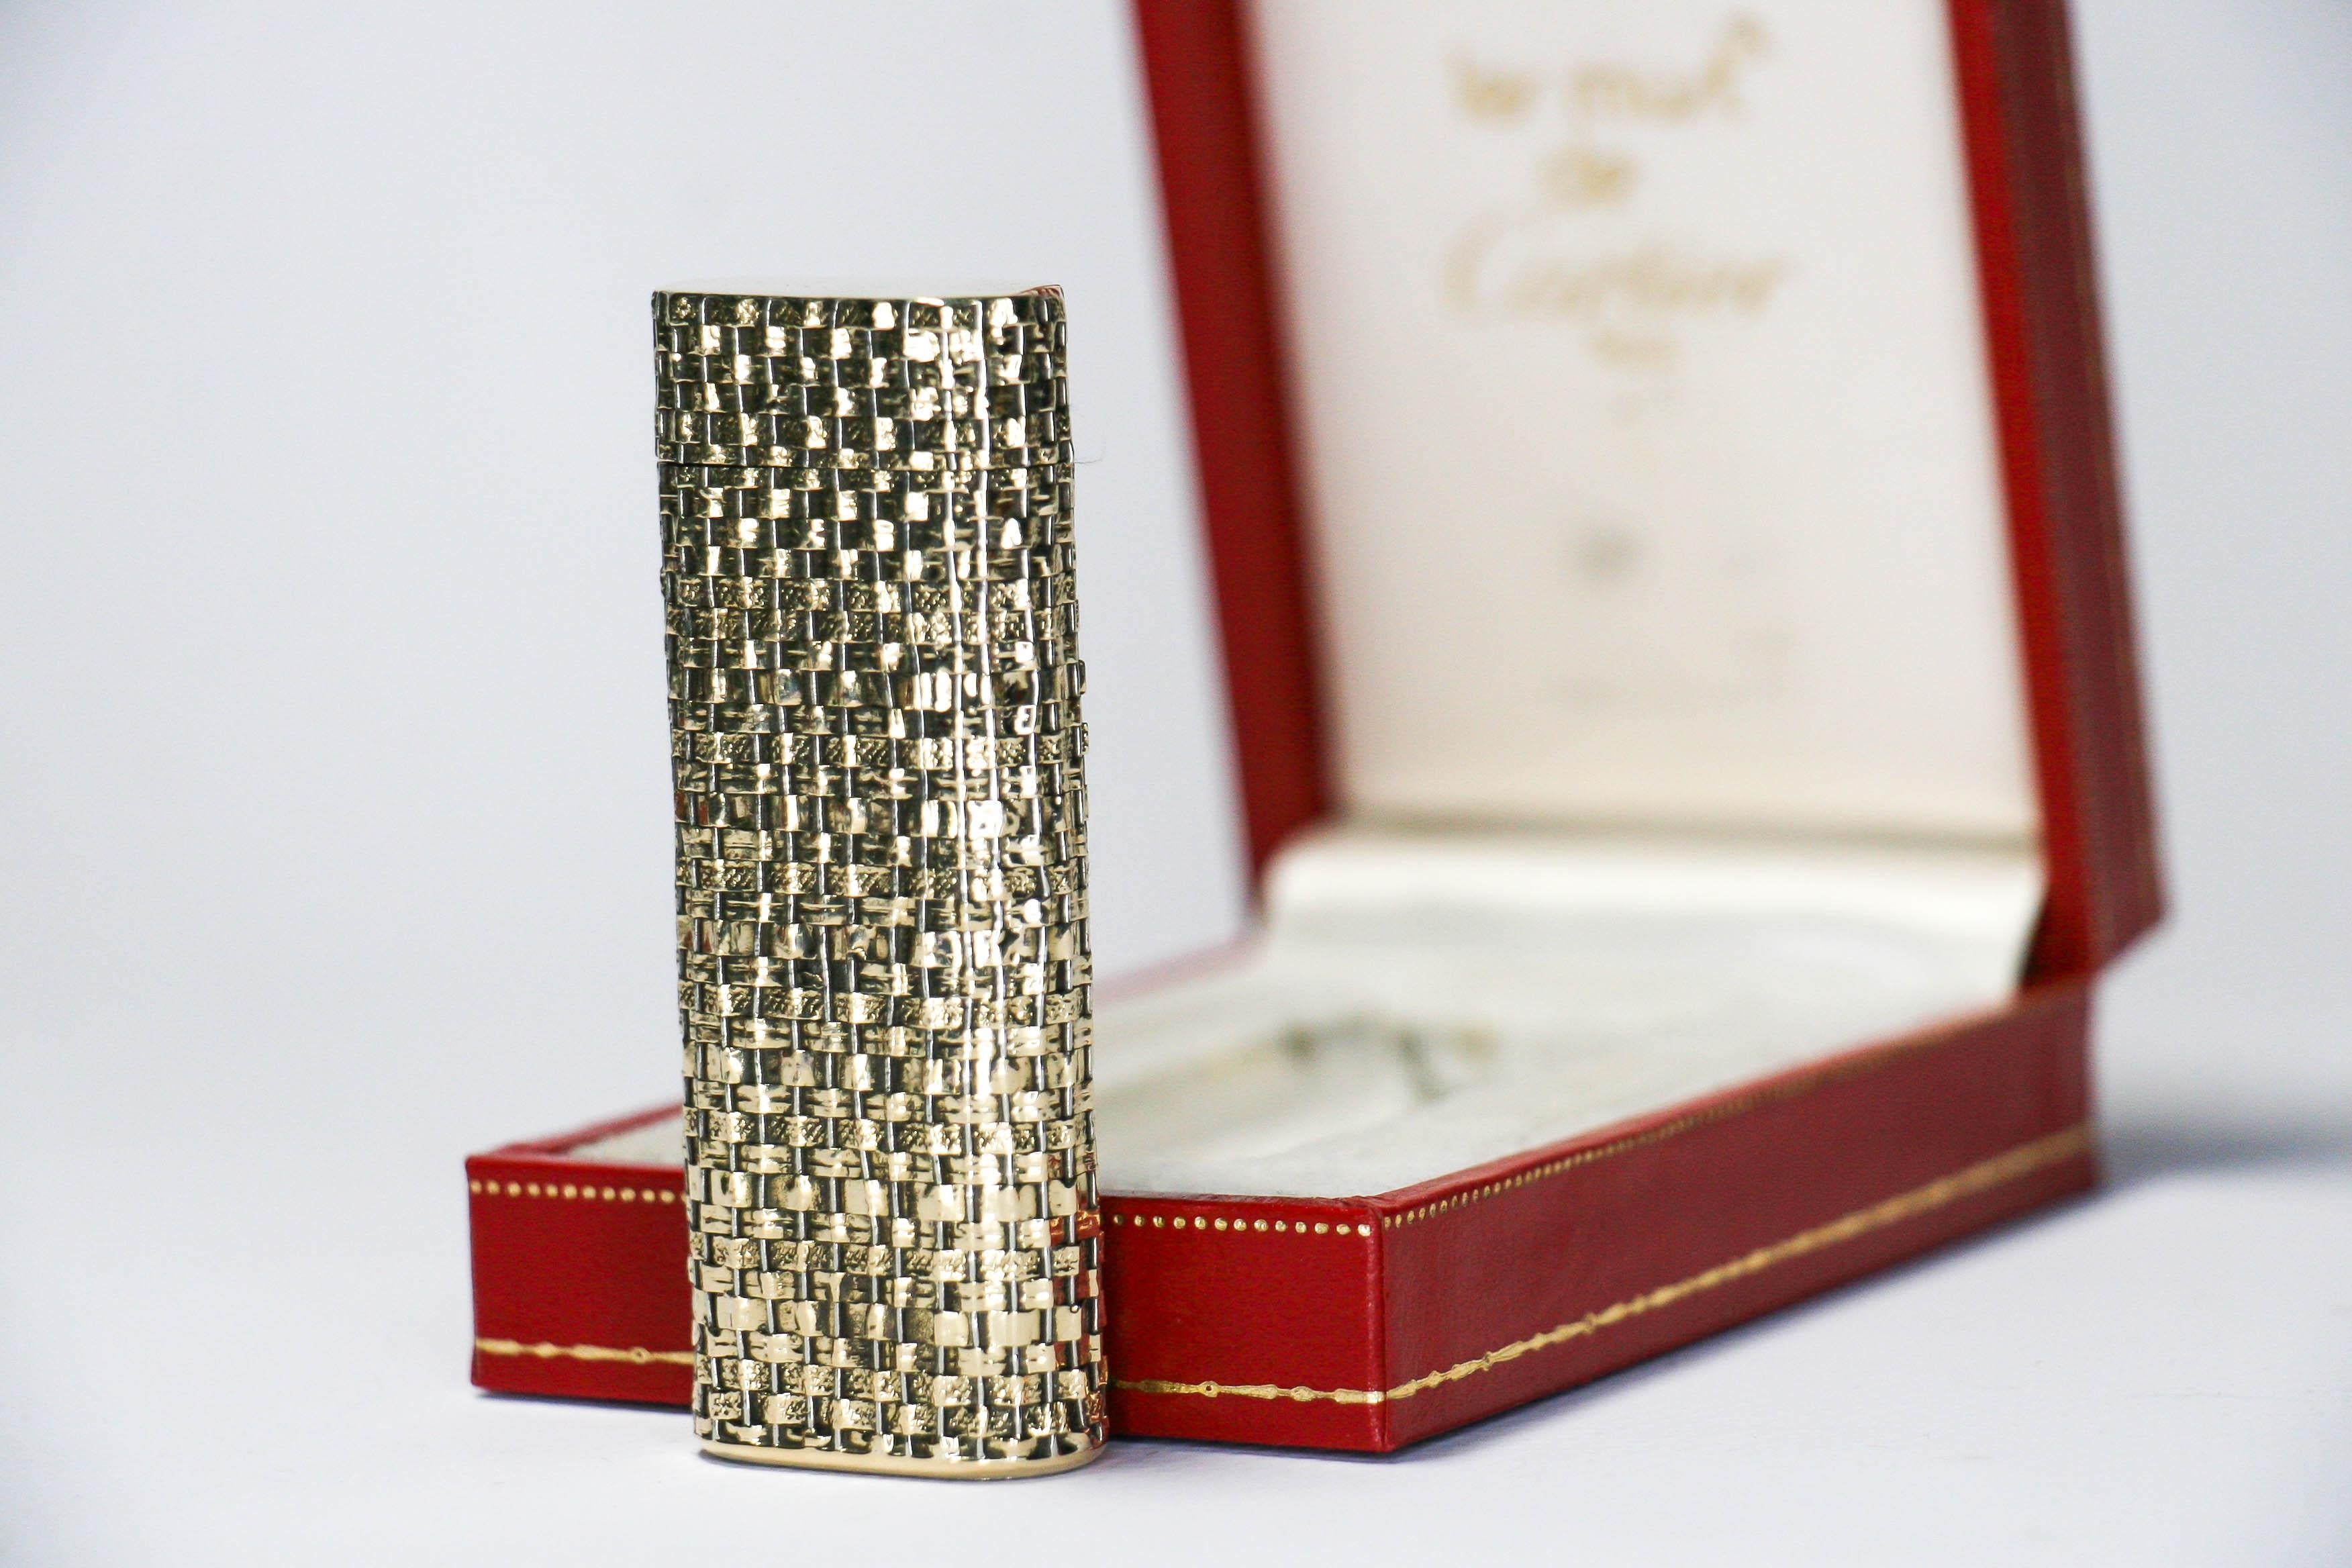 Vintage 14K Solid Gold Sleeved Cartier Les Must lighter

This absolute masterpiece of a lighter is a 14-karat solid gold-sleeved Cartier Les must lighter. Fully functional, sparks excellent, and does not leak. The lighter is in a rare complete lot,